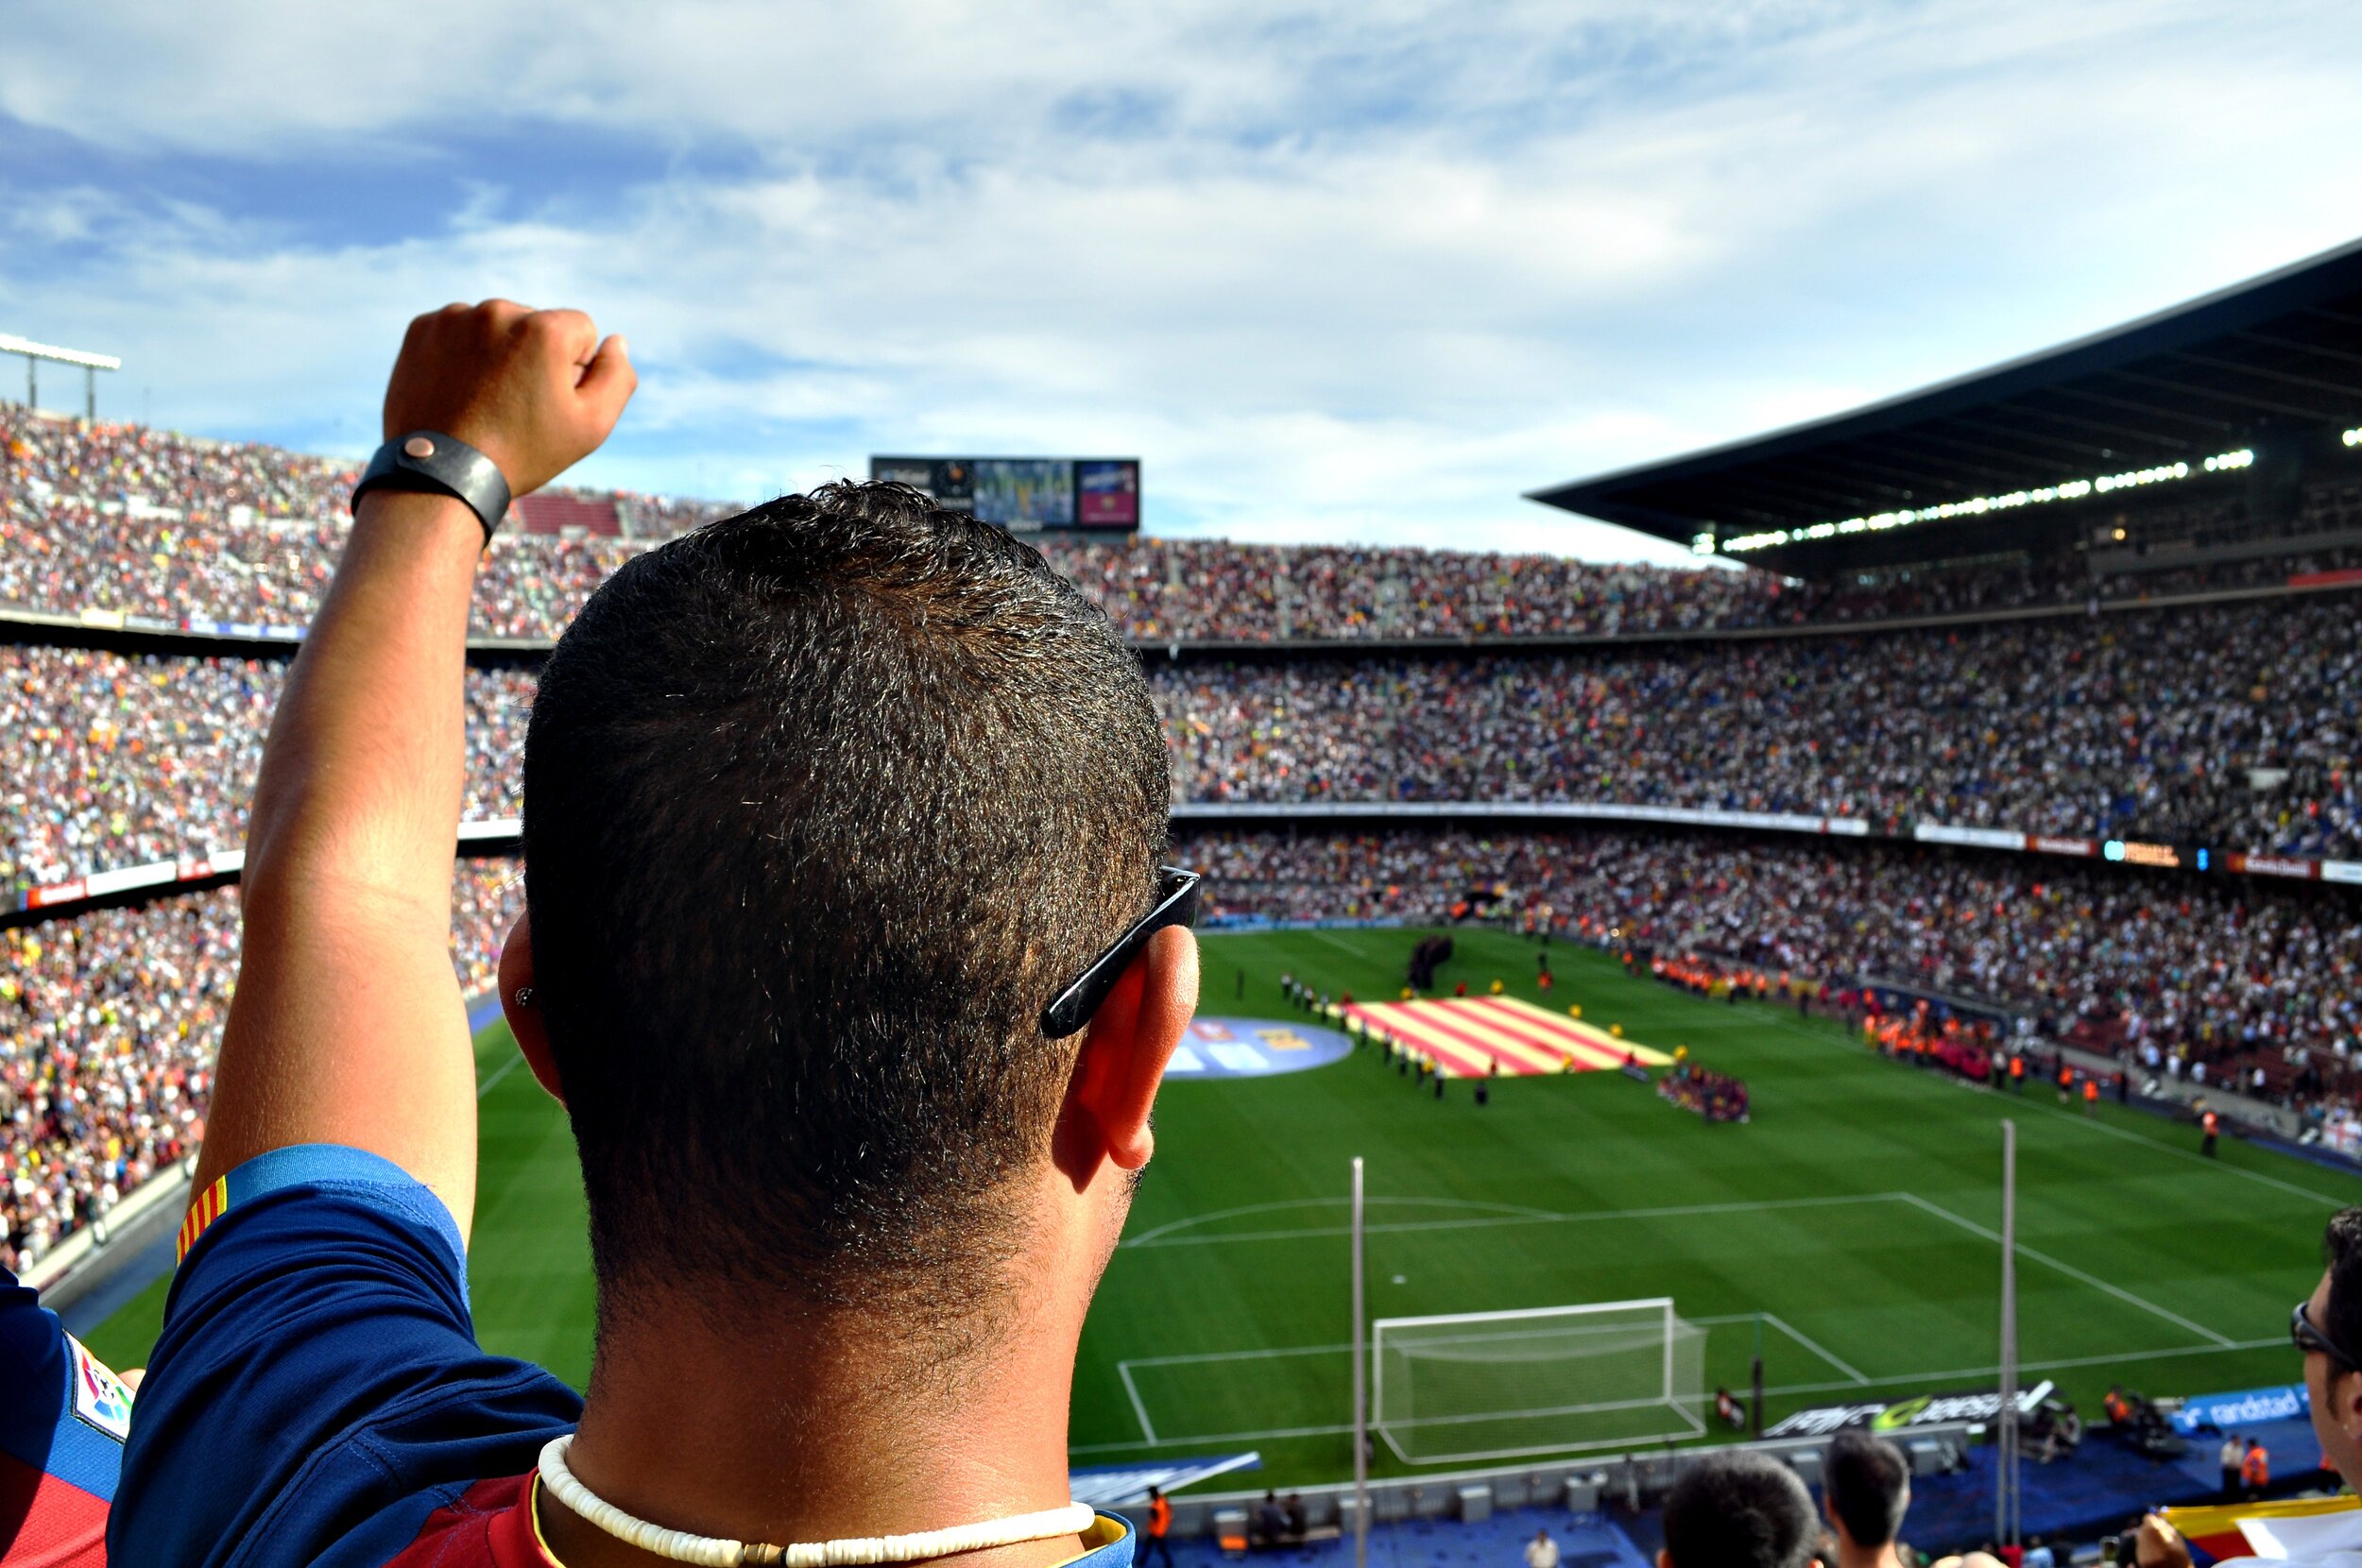 You might find yourself frustrated with the things like soccer games.